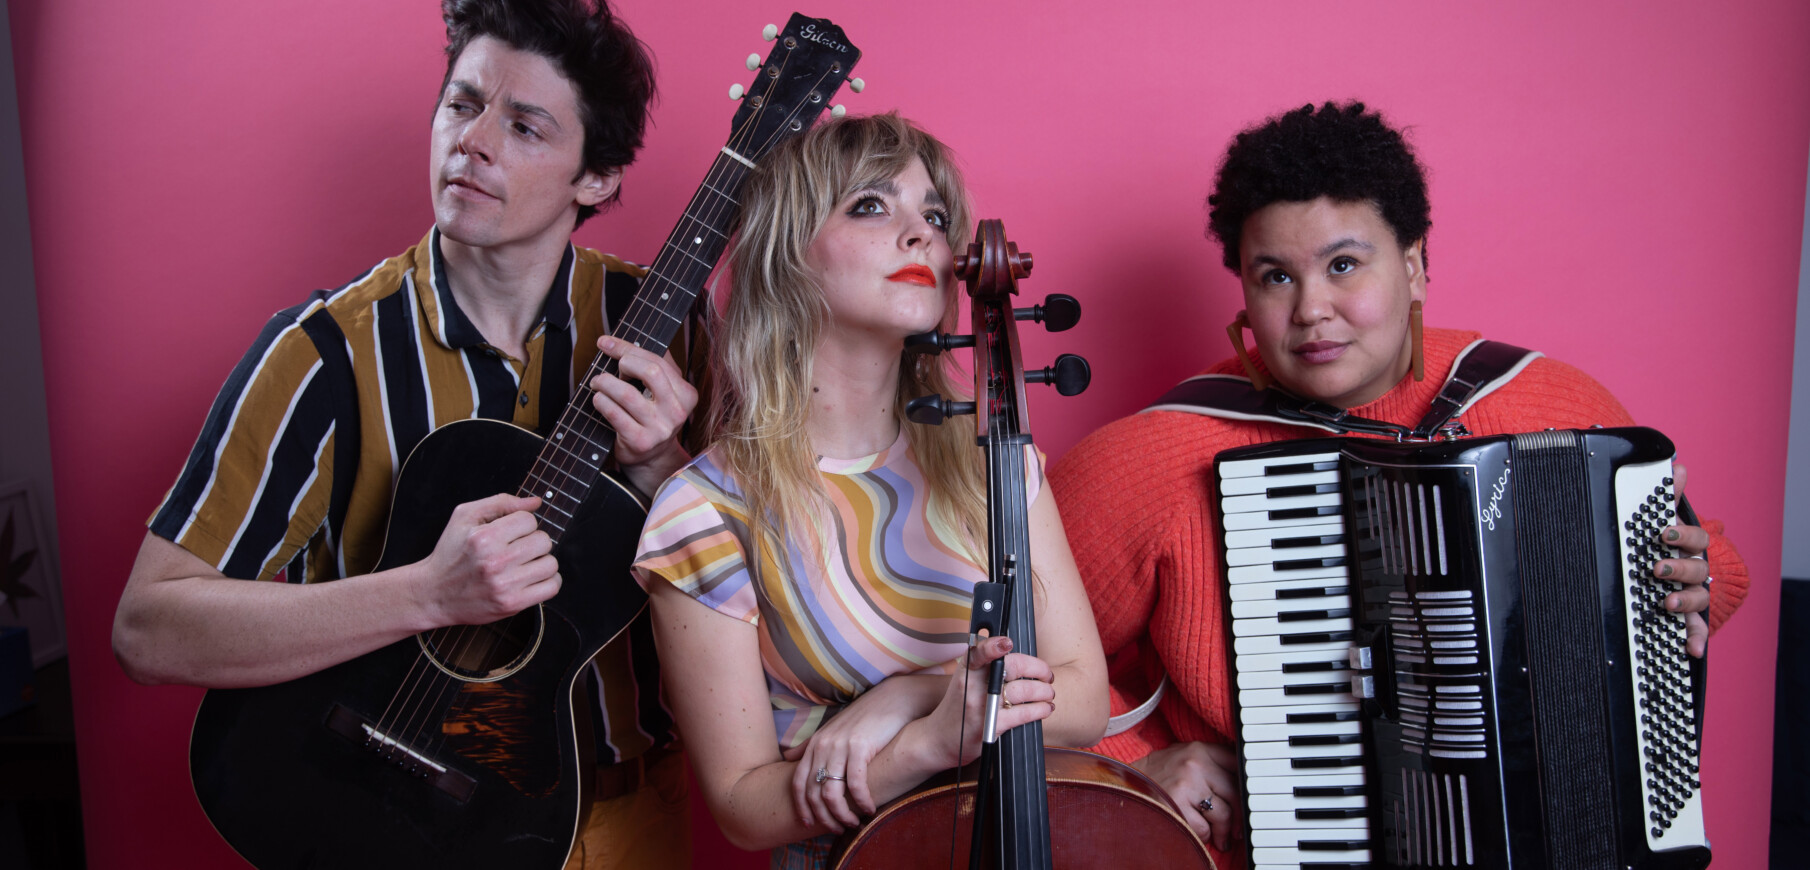 Three people seen from the waist up stand together against a pink background.A light skinned man holds a guitar, a light skinned woman holds a bass, and a dark skinned woman wears an accordian